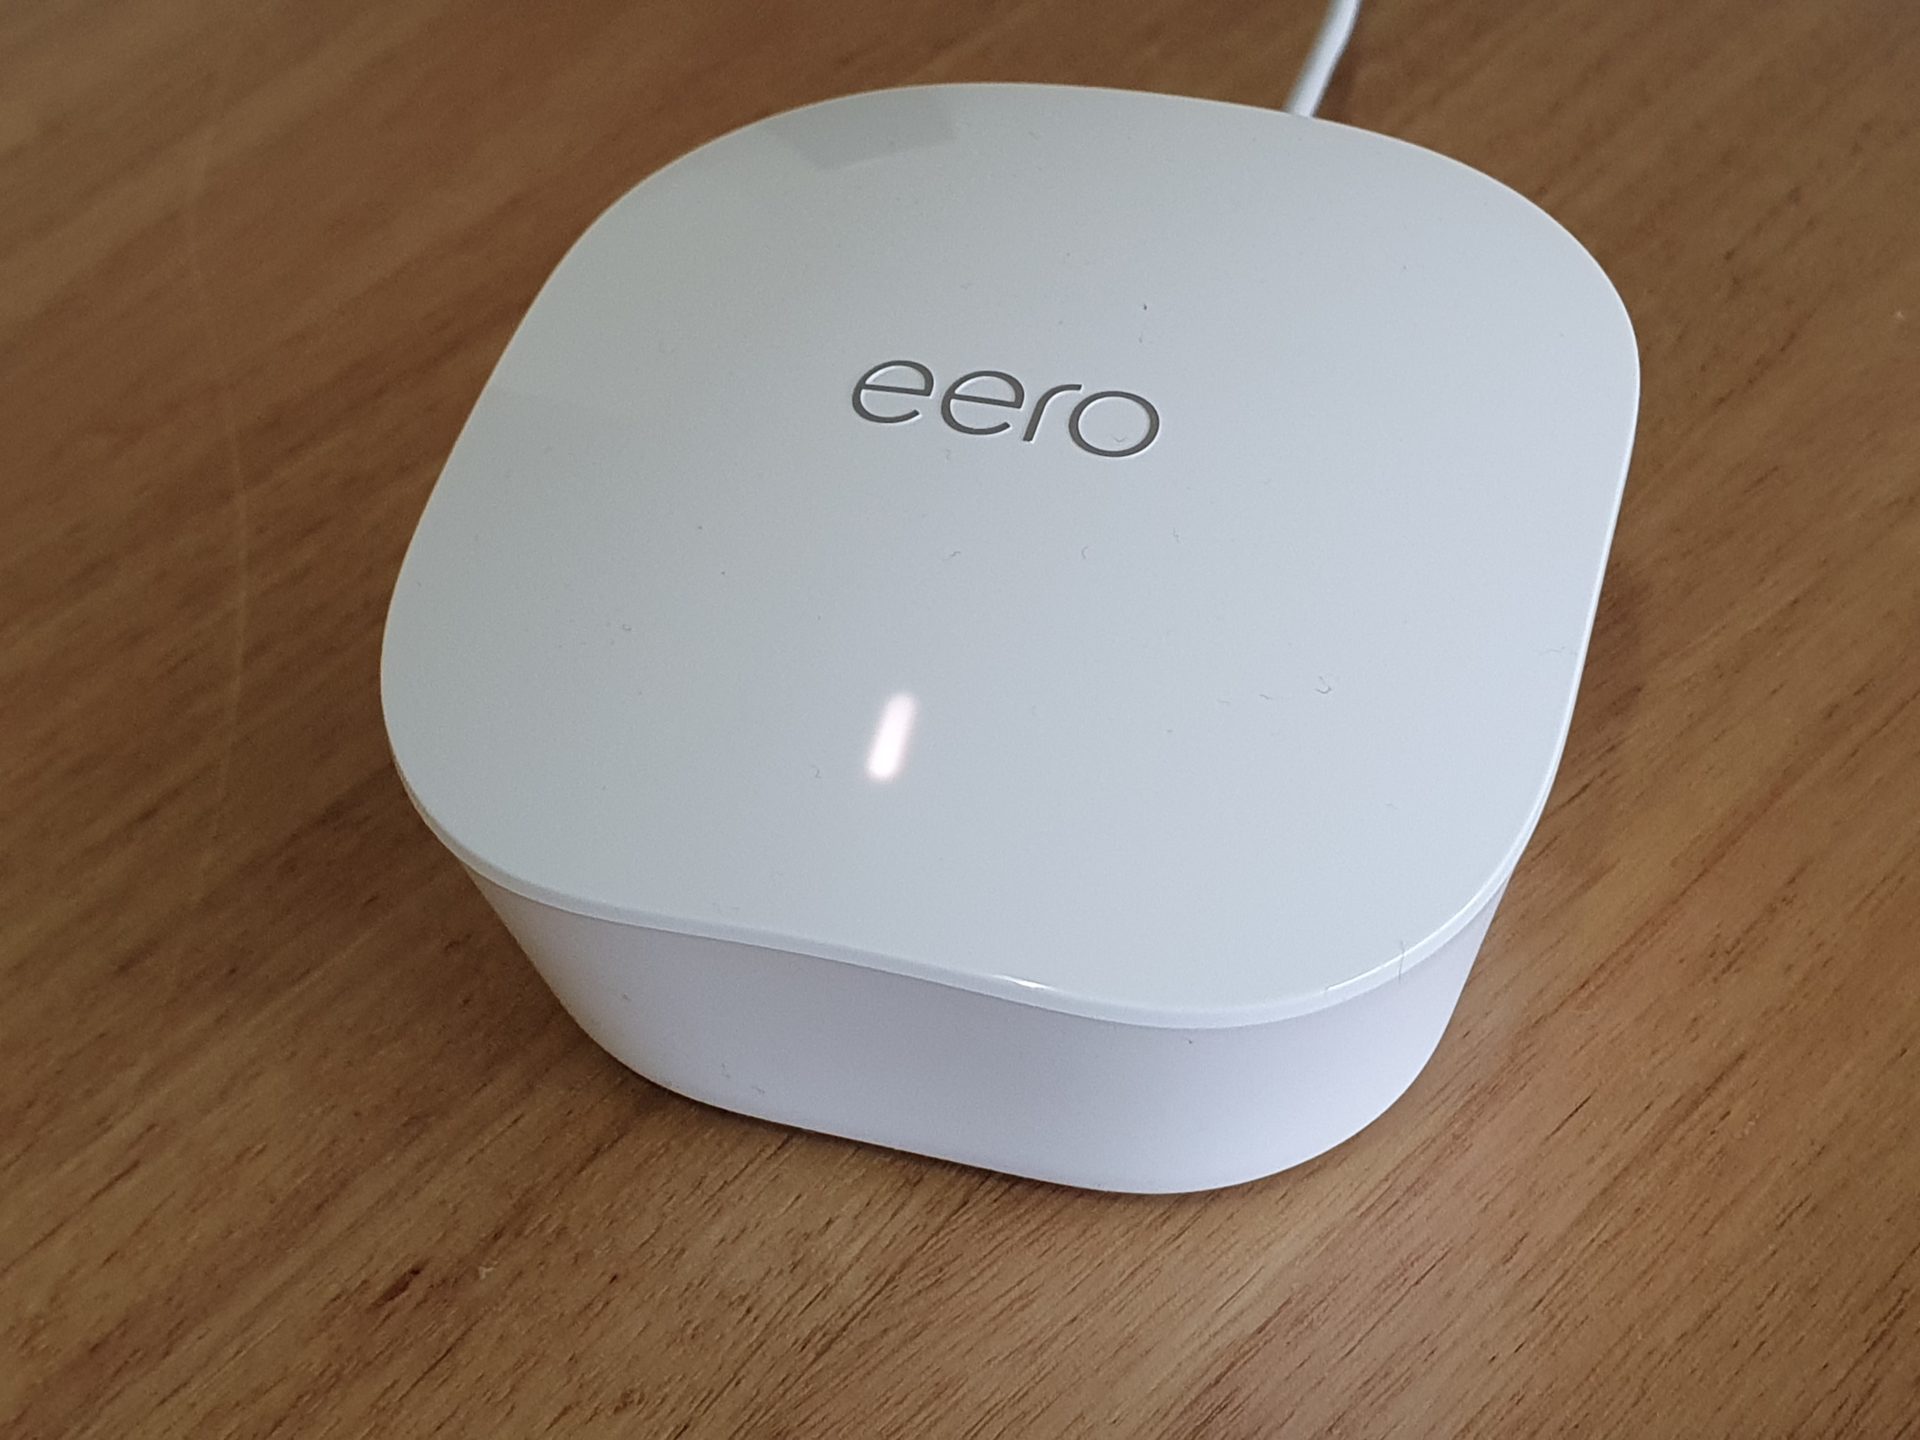 puts system eero router inside new